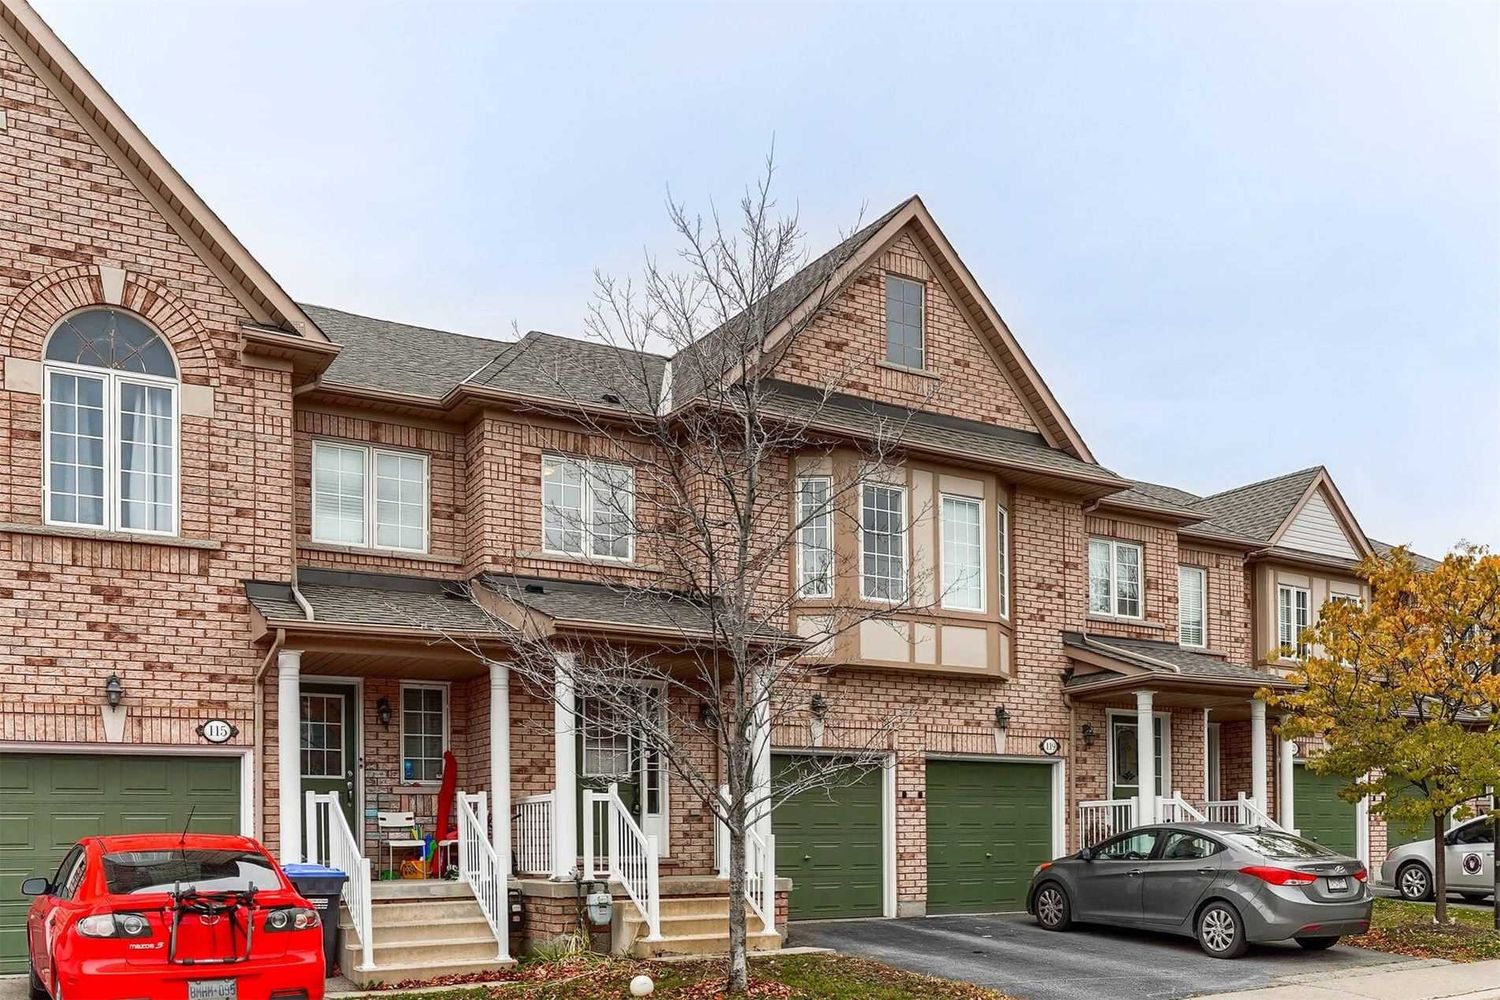 770 Othello Court. 770 Othello Court Townhomes is located in  Mississauga, Toronto - image #2 of 2